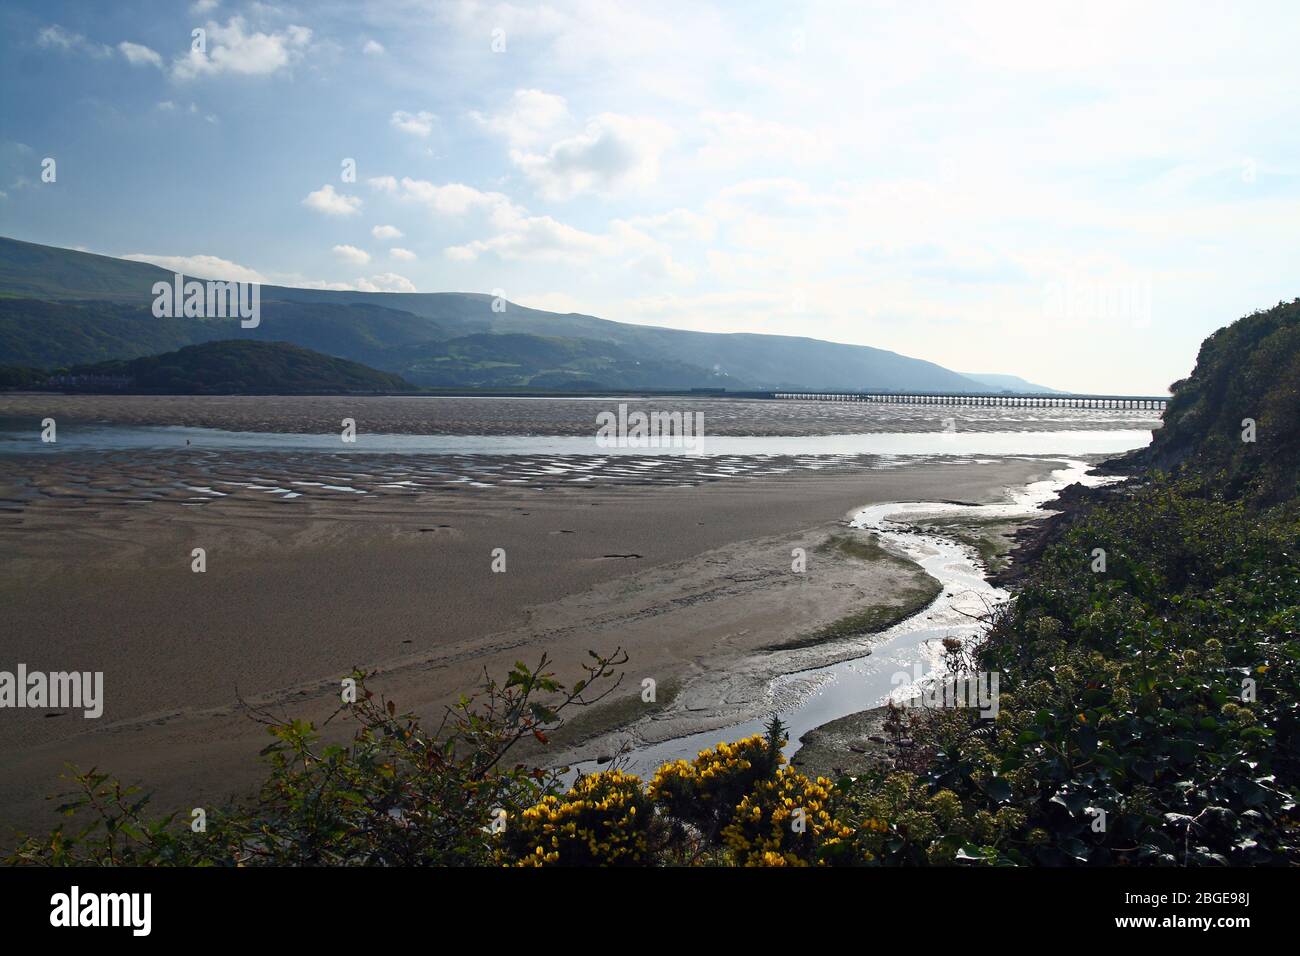 A view down the Mawddach Estuary in Gwynedd, Wales towards the Barmouth Railway Viaduct. Originally made of timber, it was built in 1867. Stock Photo